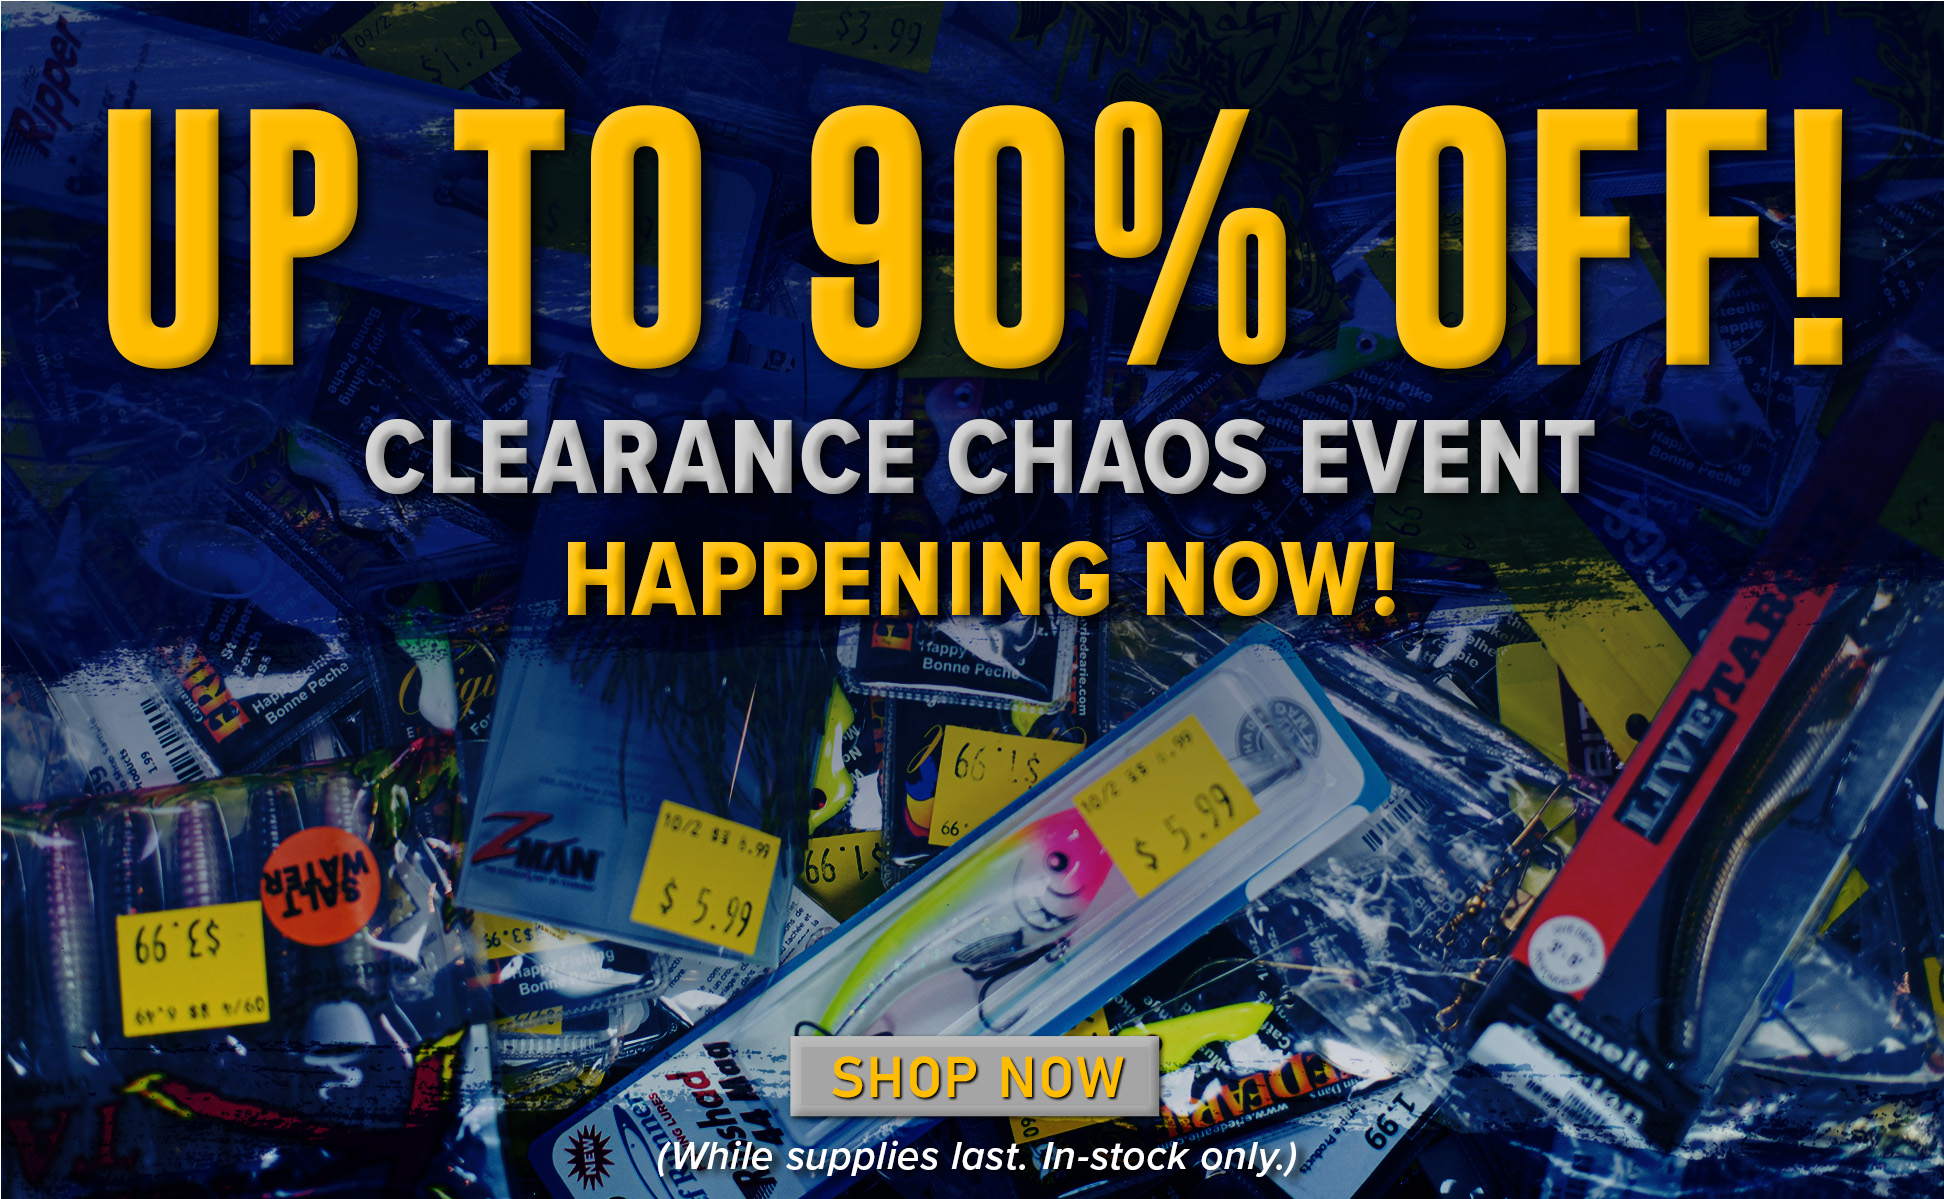 One Day Only Clearance Chaos Event! - Fish USA